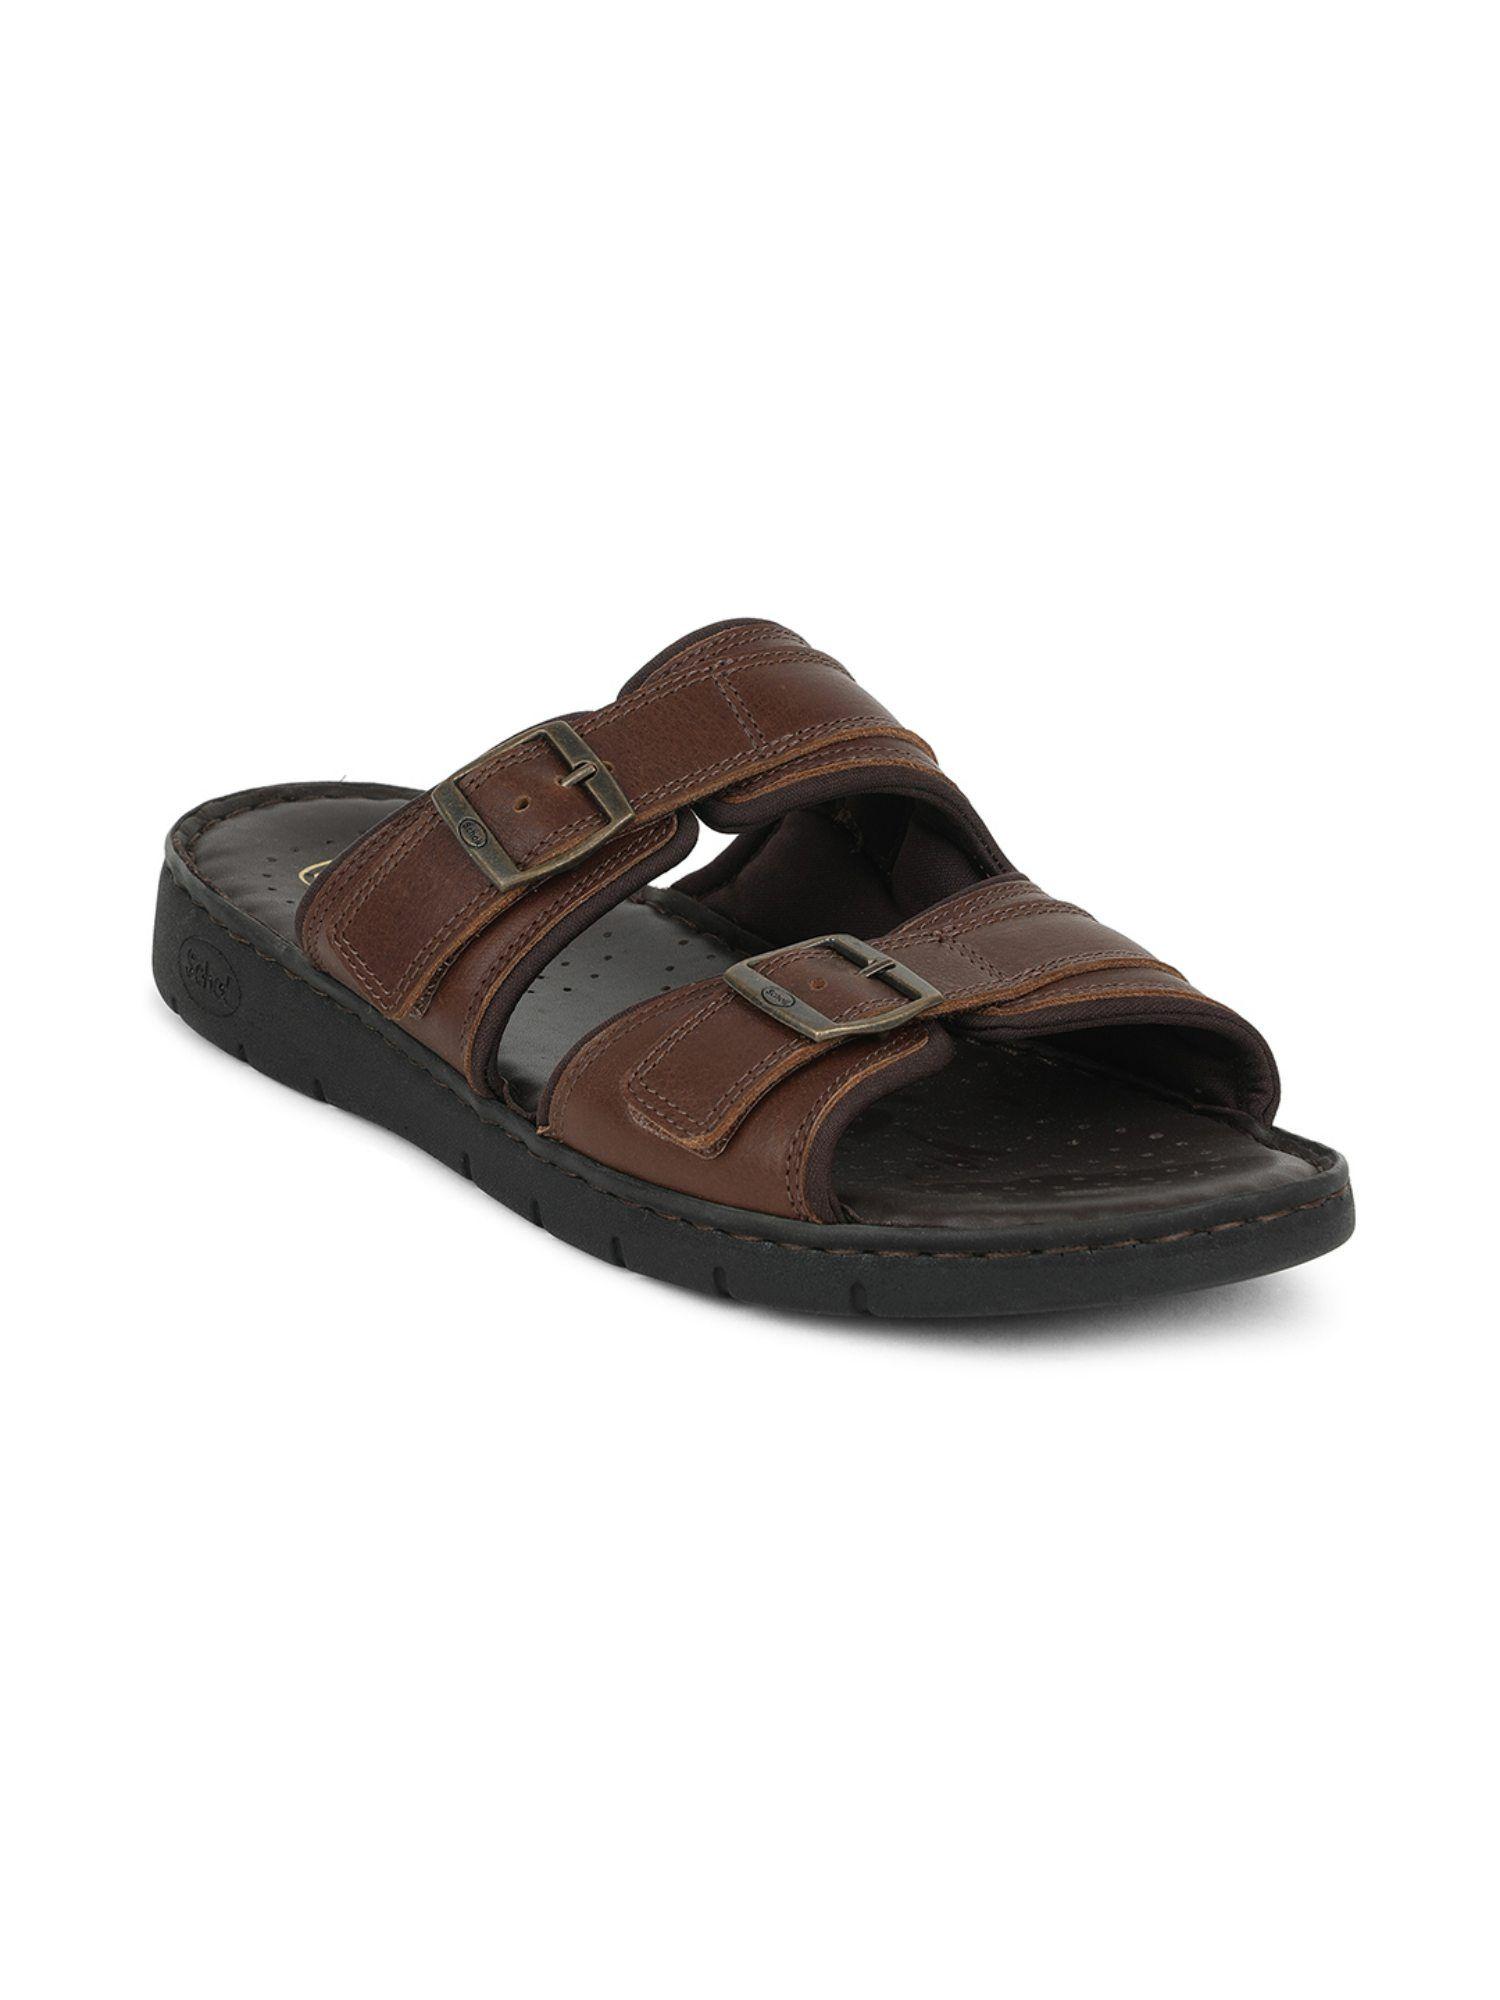 Solid Brown Sandals